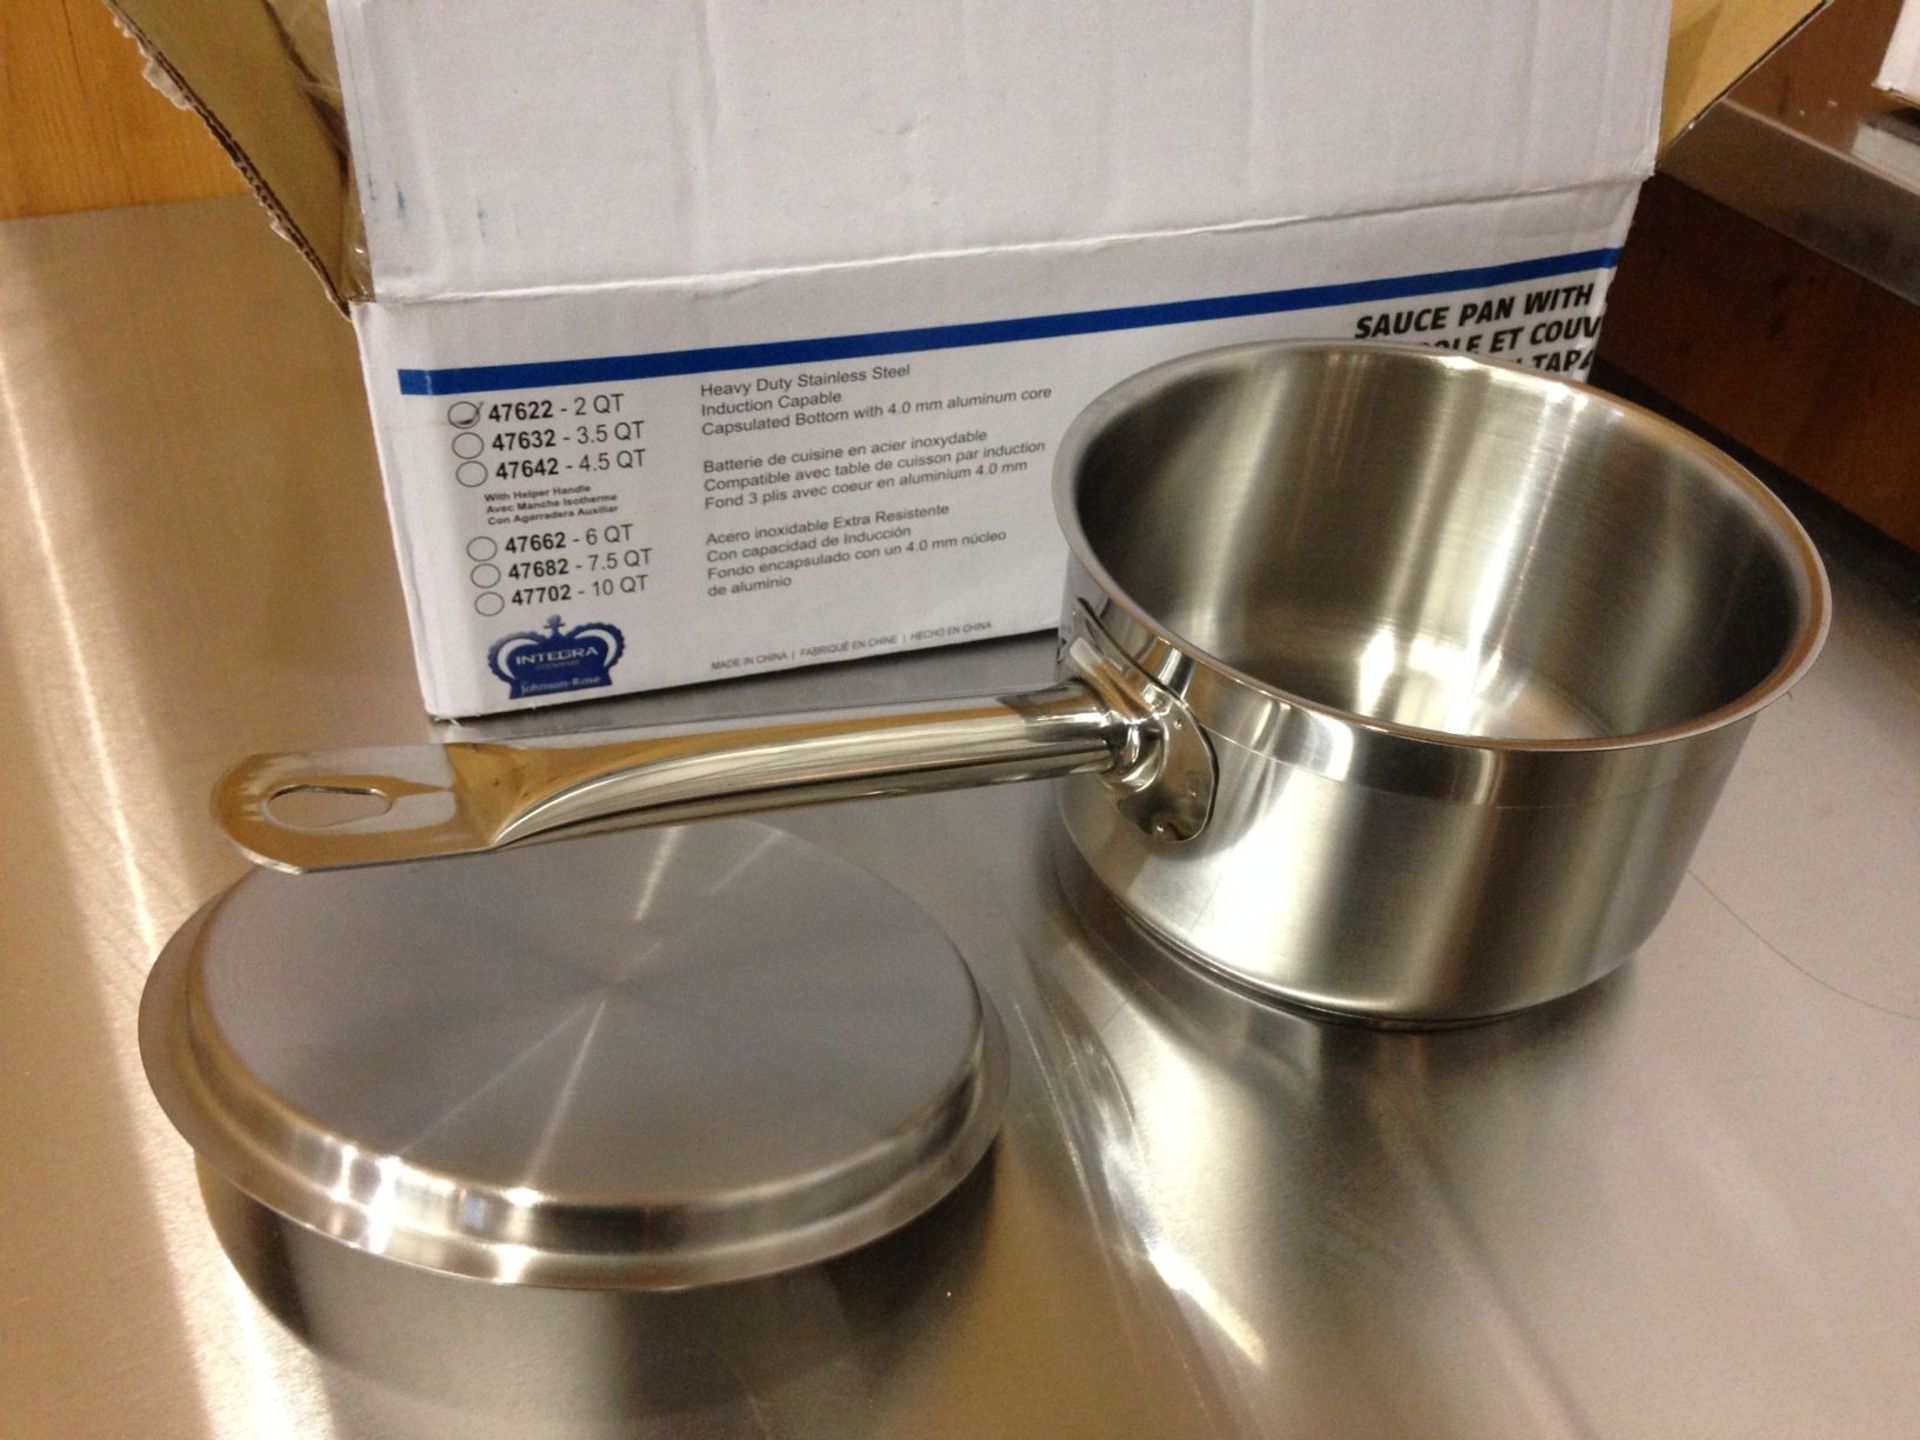 2qt Heavy Duty Sauce Pan Induction Capable - Image 2 of 3